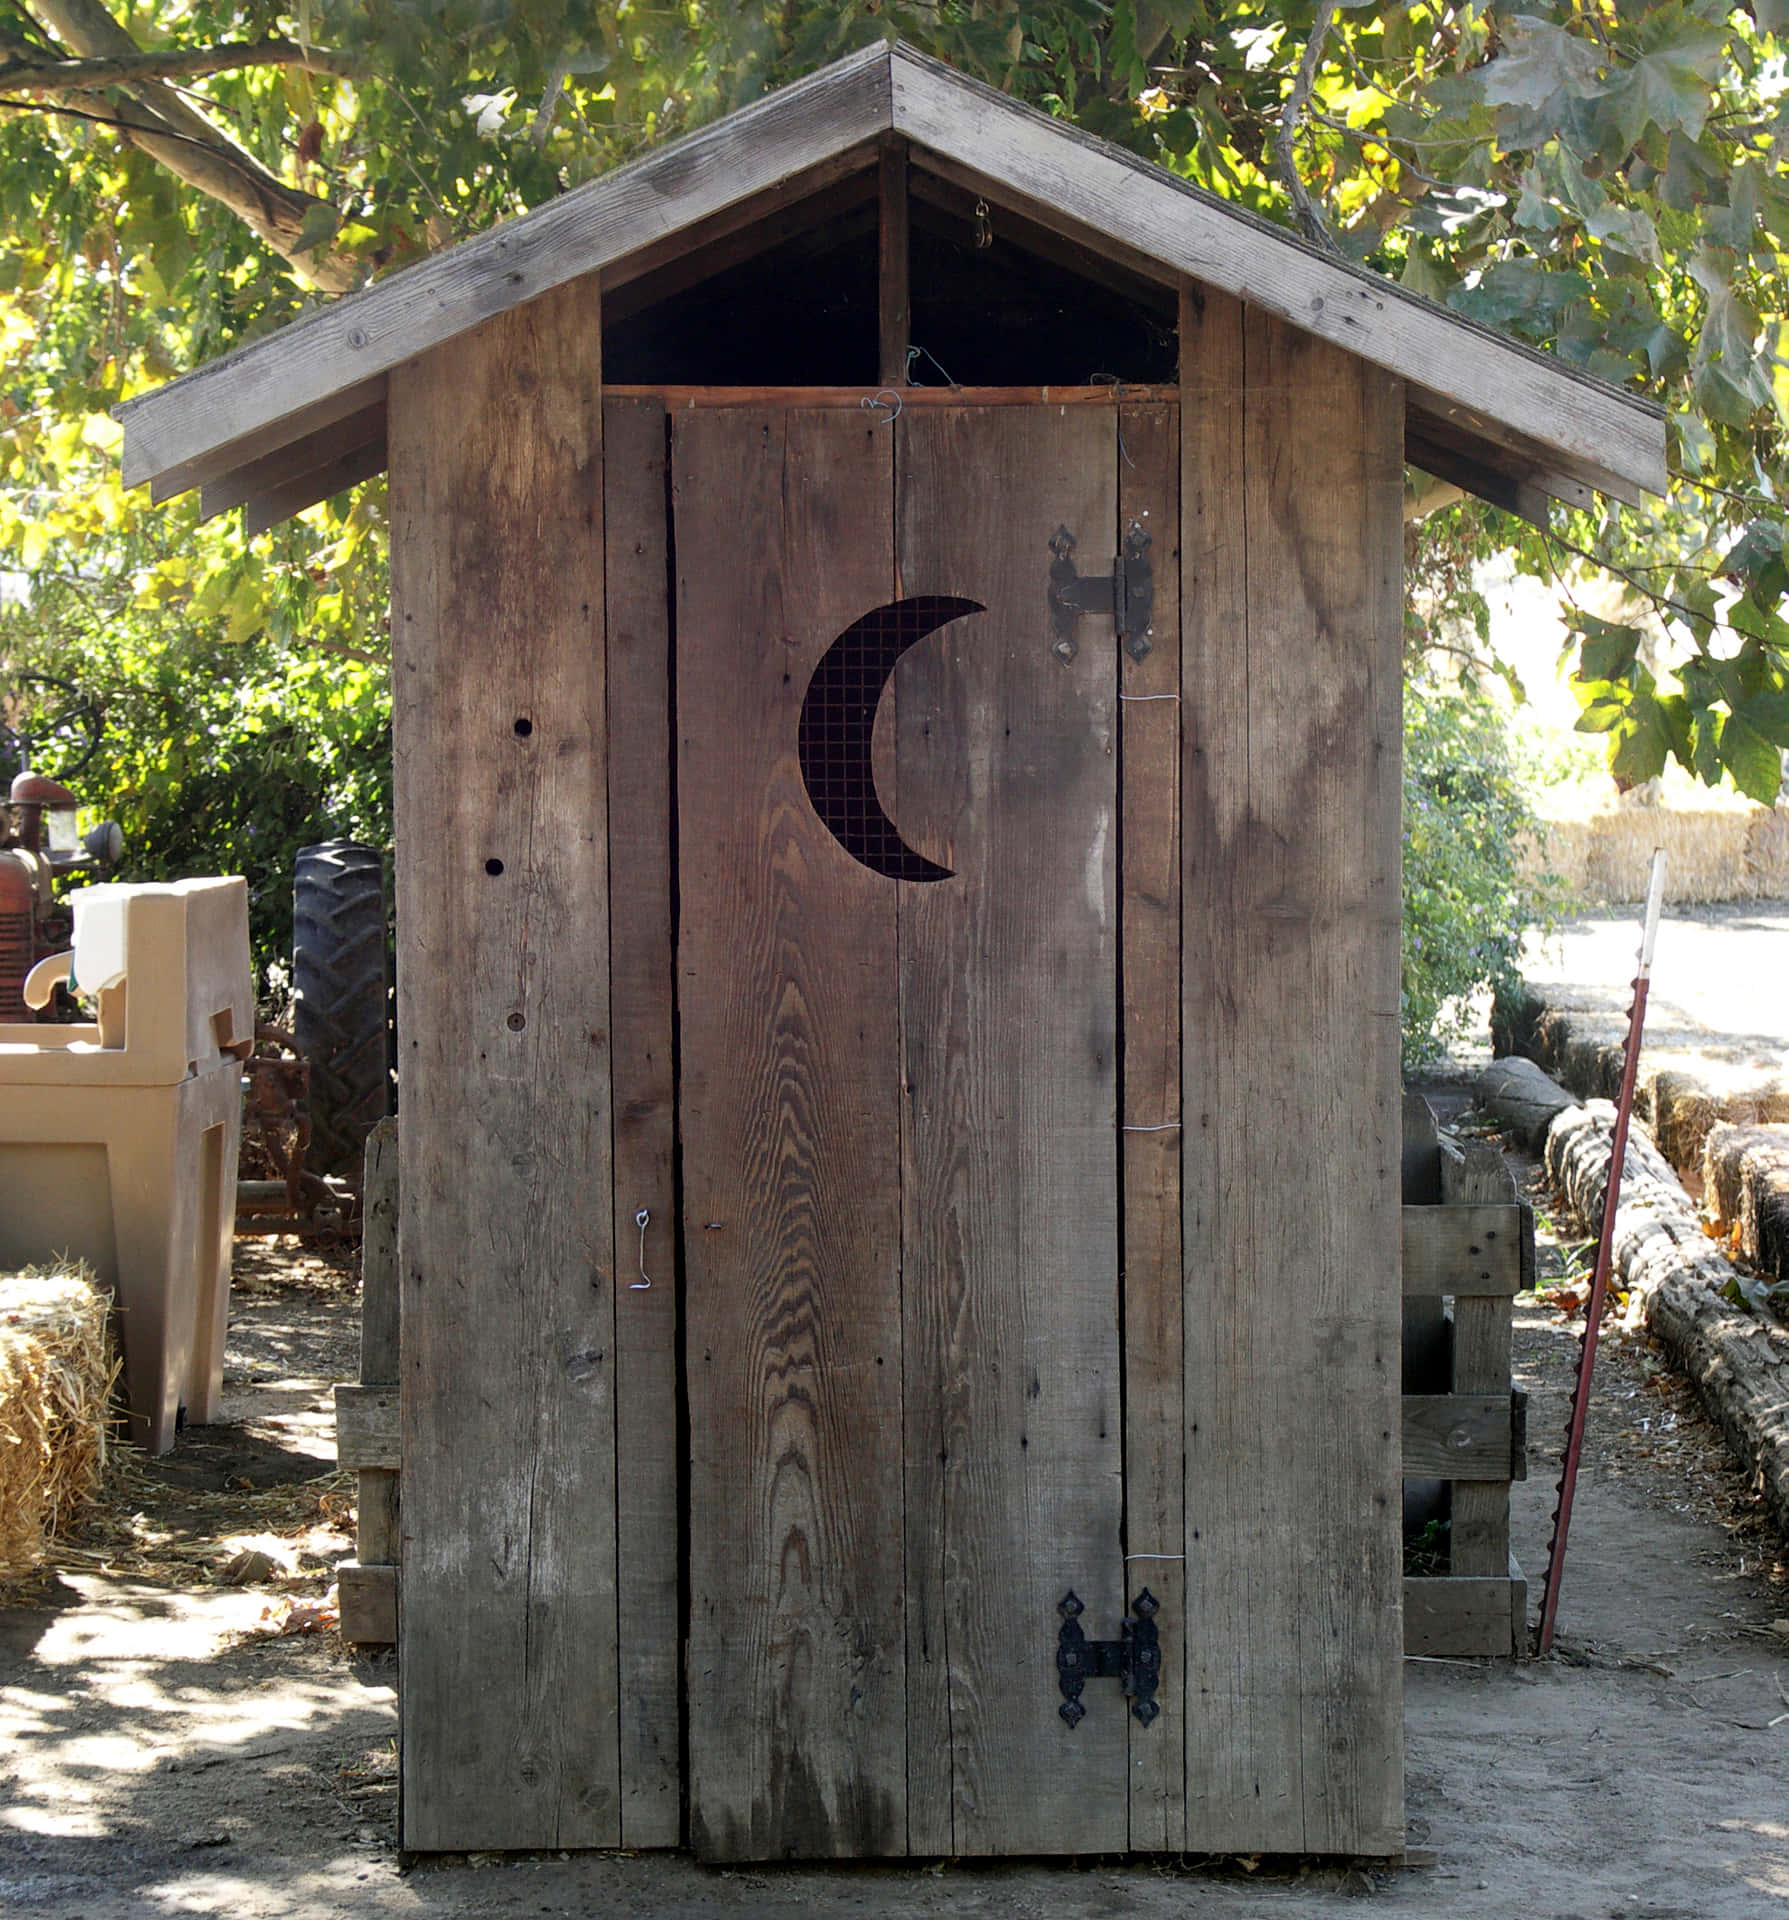 Keep Nature Clean - Building an Outhouse